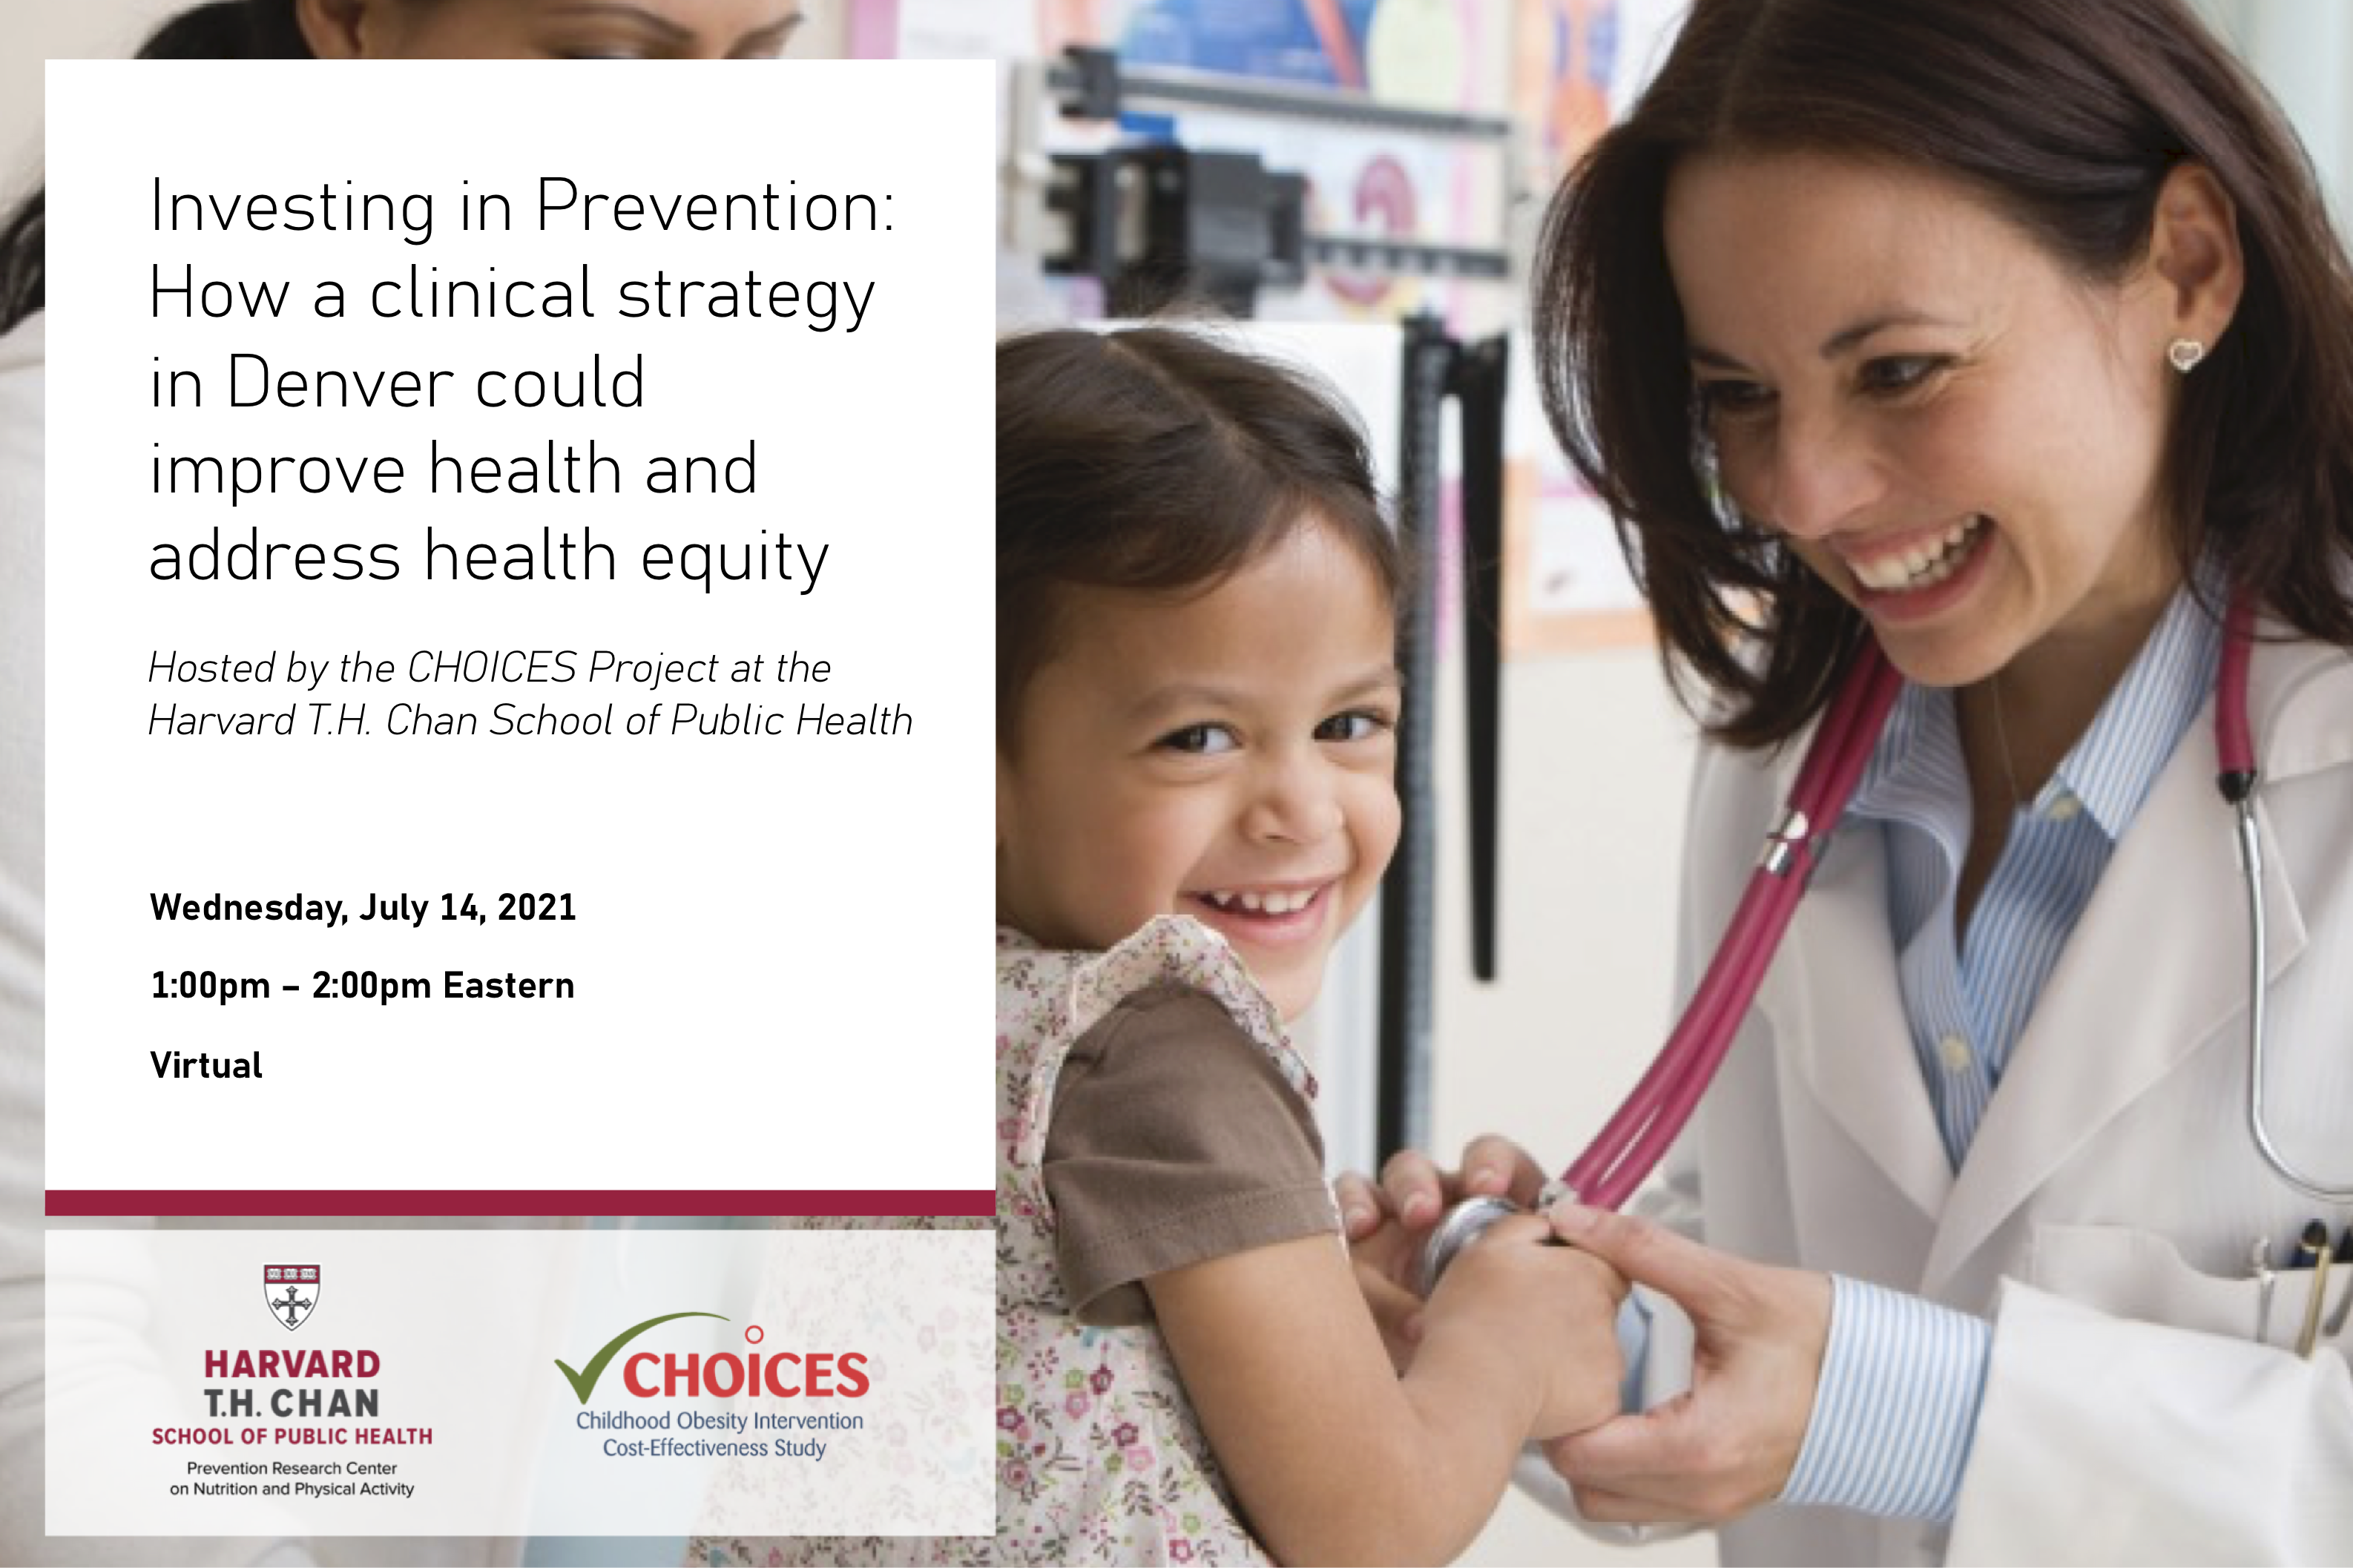 Investing in Prevention: How a clinical strategy in Denver could improve health and address health equity; hosted by the CHOICES Project at the Harvard T.H. Chan School of Public Health; Wednesday, July 14 from 1:00pm - 2:00pm Eastern. This is a virtual event. Prevention Research Center and CHOICES Project logos at the bottom. Image of female doctor with young female patient on the right hand side.